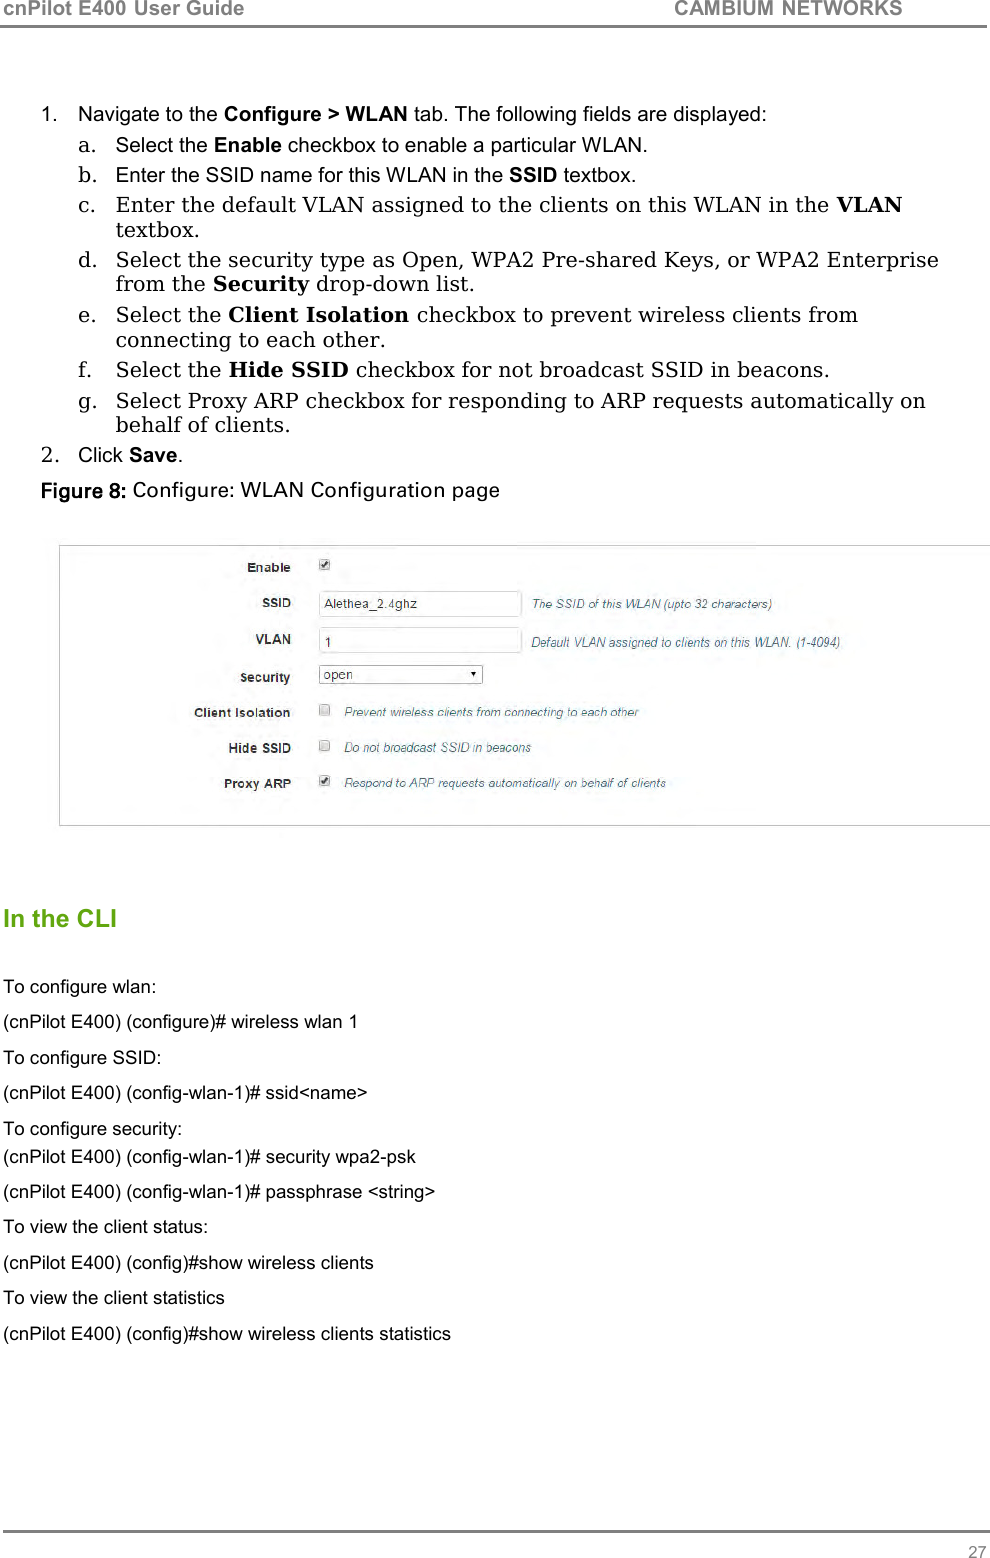 cnPilot E400 User Guide           CAMBIUM NETWORKS   27  1.  Navigate to the Configure &gt; WLAN tab. The following fields are displayed: a.  Select the Enable checkbox to enable a particular WLAN.  b.  Enter the SSID name for this WLAN in the SSID textbox. c. Enter the default VLAN assigned to the clients on this WLAN in the VLAN textbox. d. Select the security type as Open, WPA2 Pre-shared Keys, or WPA2 Enterprise from the Security drop-down list. e. Select the Client Isolation checkbox to prevent wireless clients from connecting to each other. f. Select the Hide SSID checkbox for not broadcast SSID in beacons. g. Select Proxy ARP checkbox for responding to ARP requests automatically on behalf of clients. 2.  Click Save. Figure 8: Configure: WLAN Configuration page     In the CLI  To configure wlan: (cnPilot E400) (configure)# wireless wlan 1 To configure SSID: (cnPilot E400) (config-wlan-1)# ssid&lt;name&gt; To configure security: (cnPilot E400) (config-wlan-1)# security wpa2-psk (cnPilot E400) (config-wlan-1)# passphrase &lt;string&gt; To view the client status: (cnPilot E400) (config)#show wireless clients To view the client statistics (cnPilot E400) (config)#show wireless clients statistics  